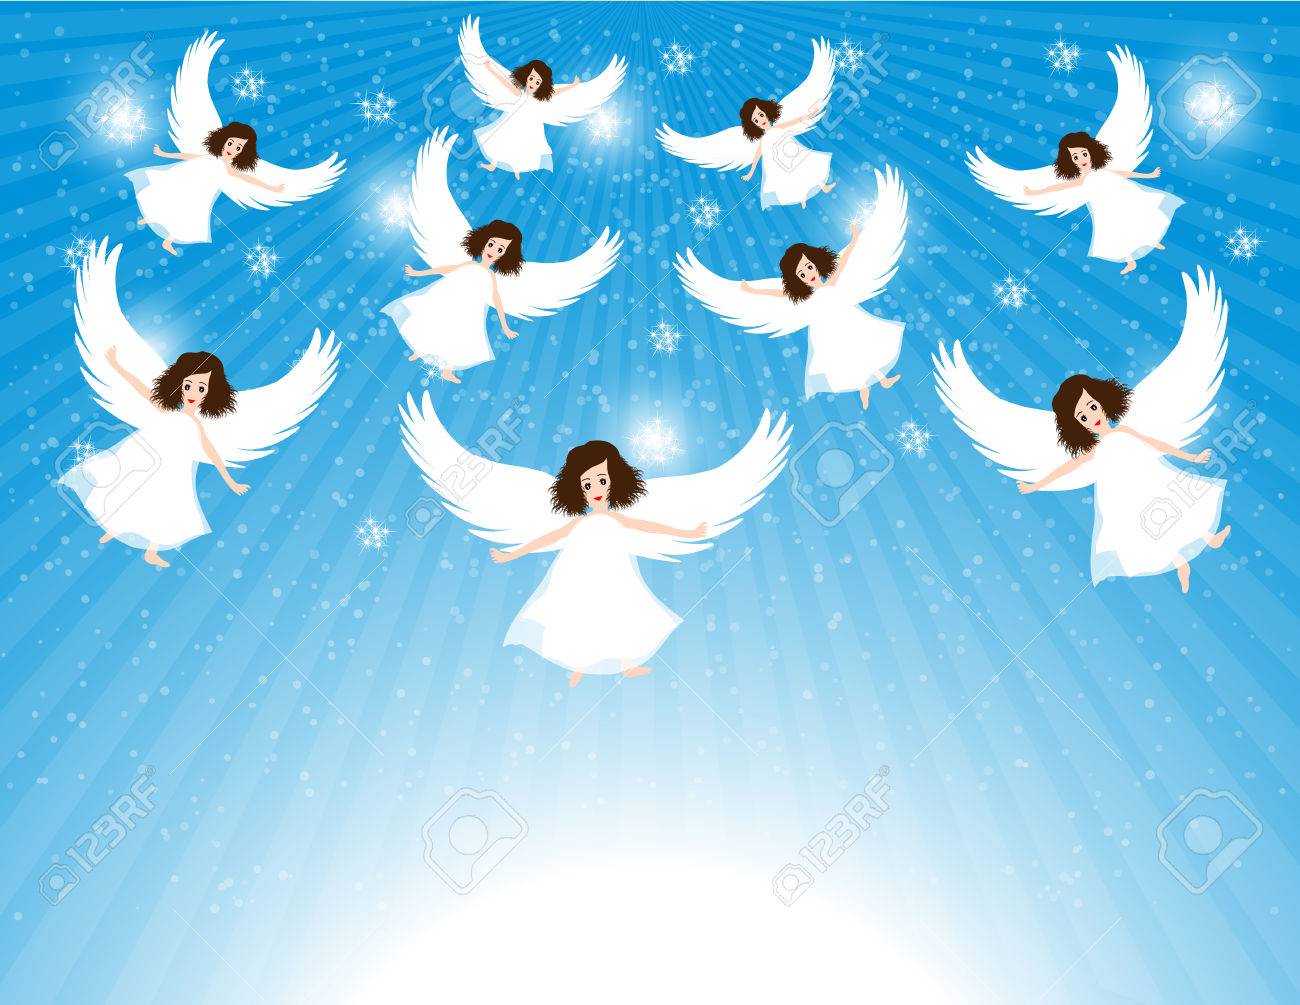 free clipart of angels group